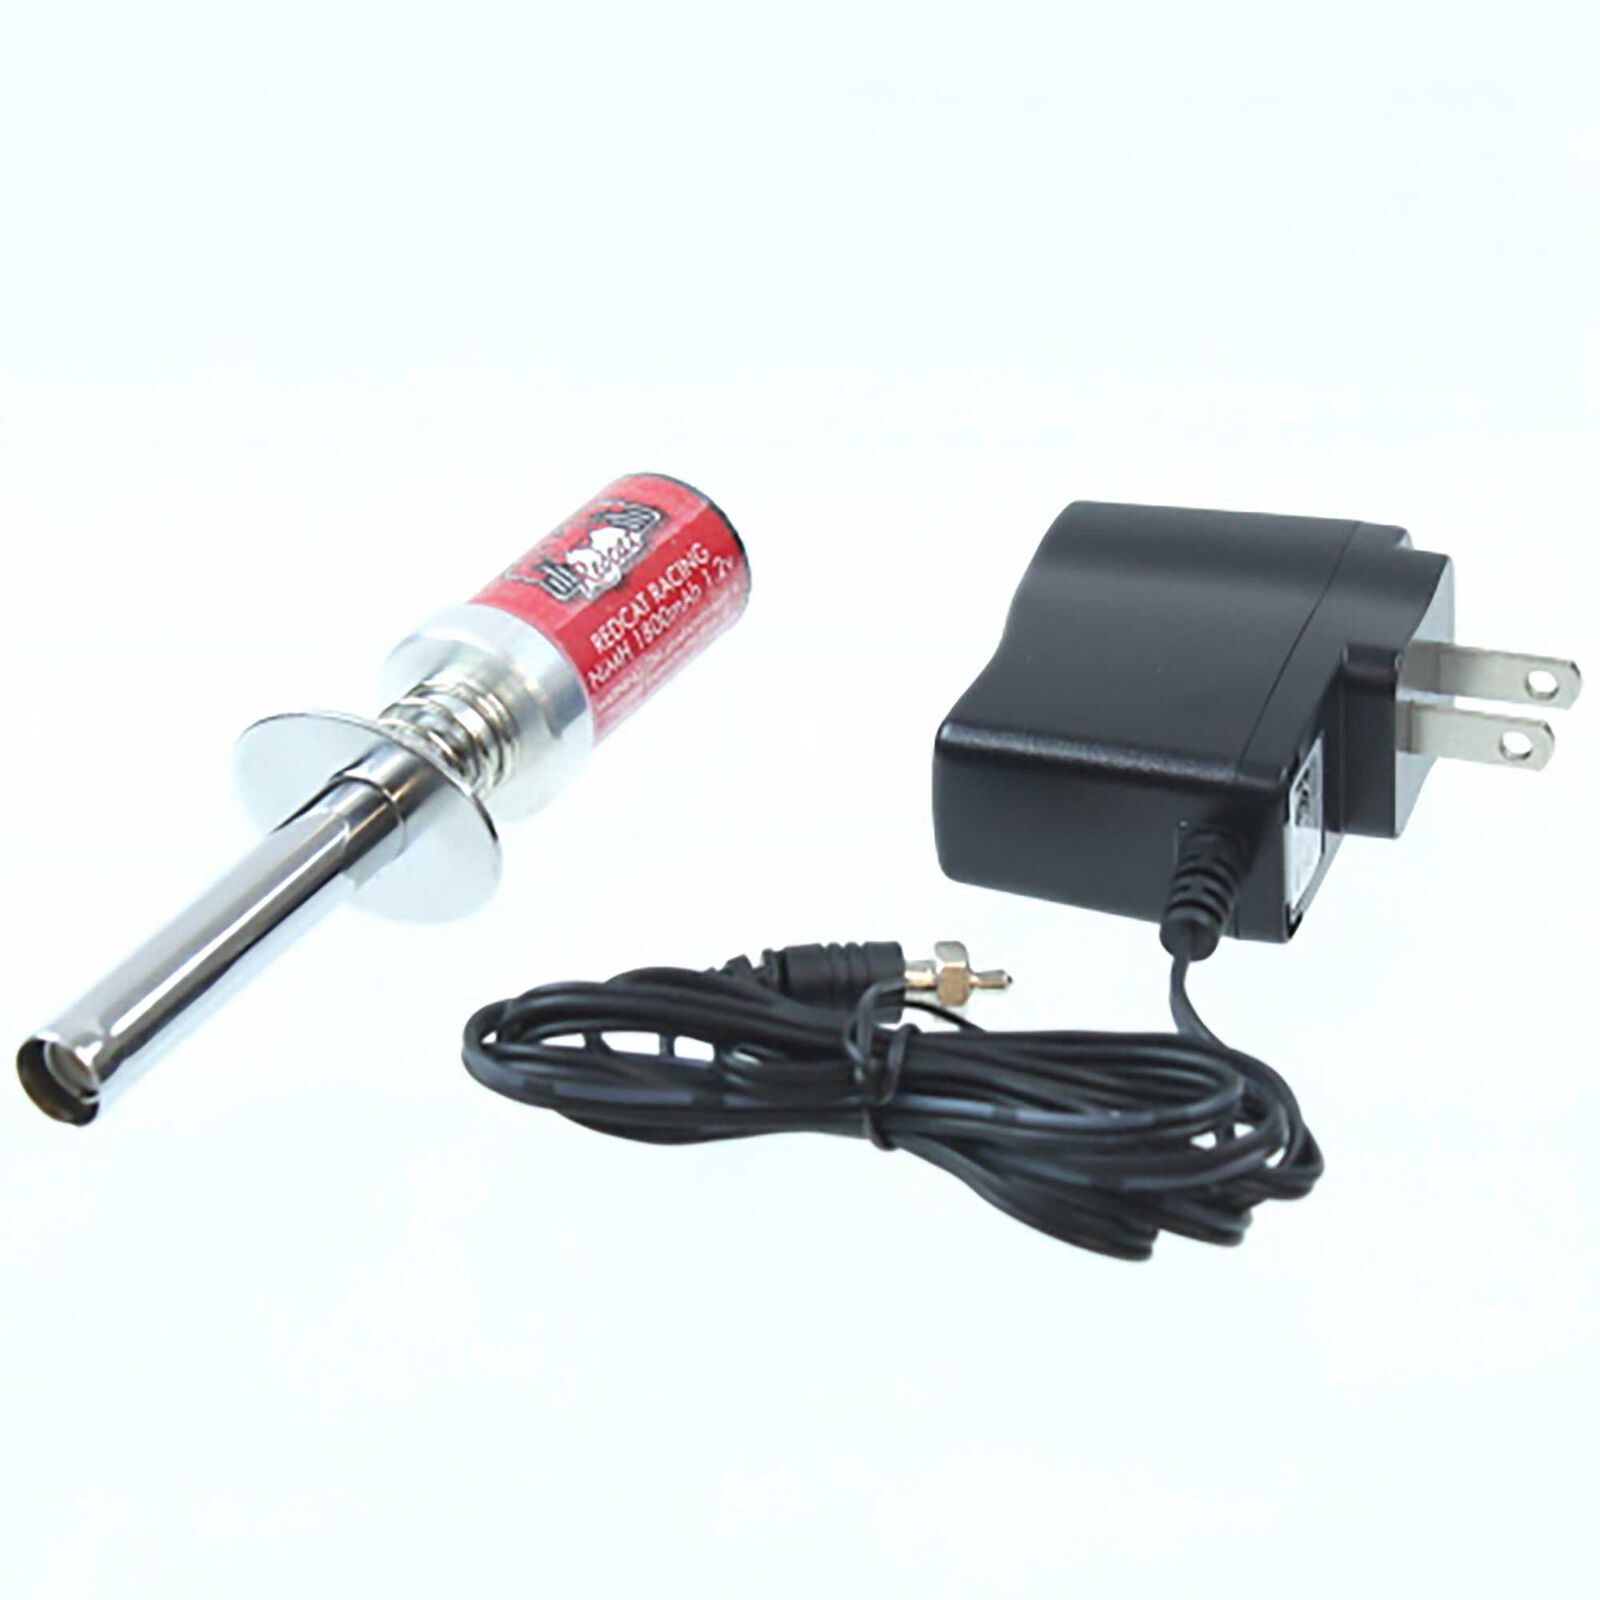 Glow Plug Igniter with Charger: EQ 3.5